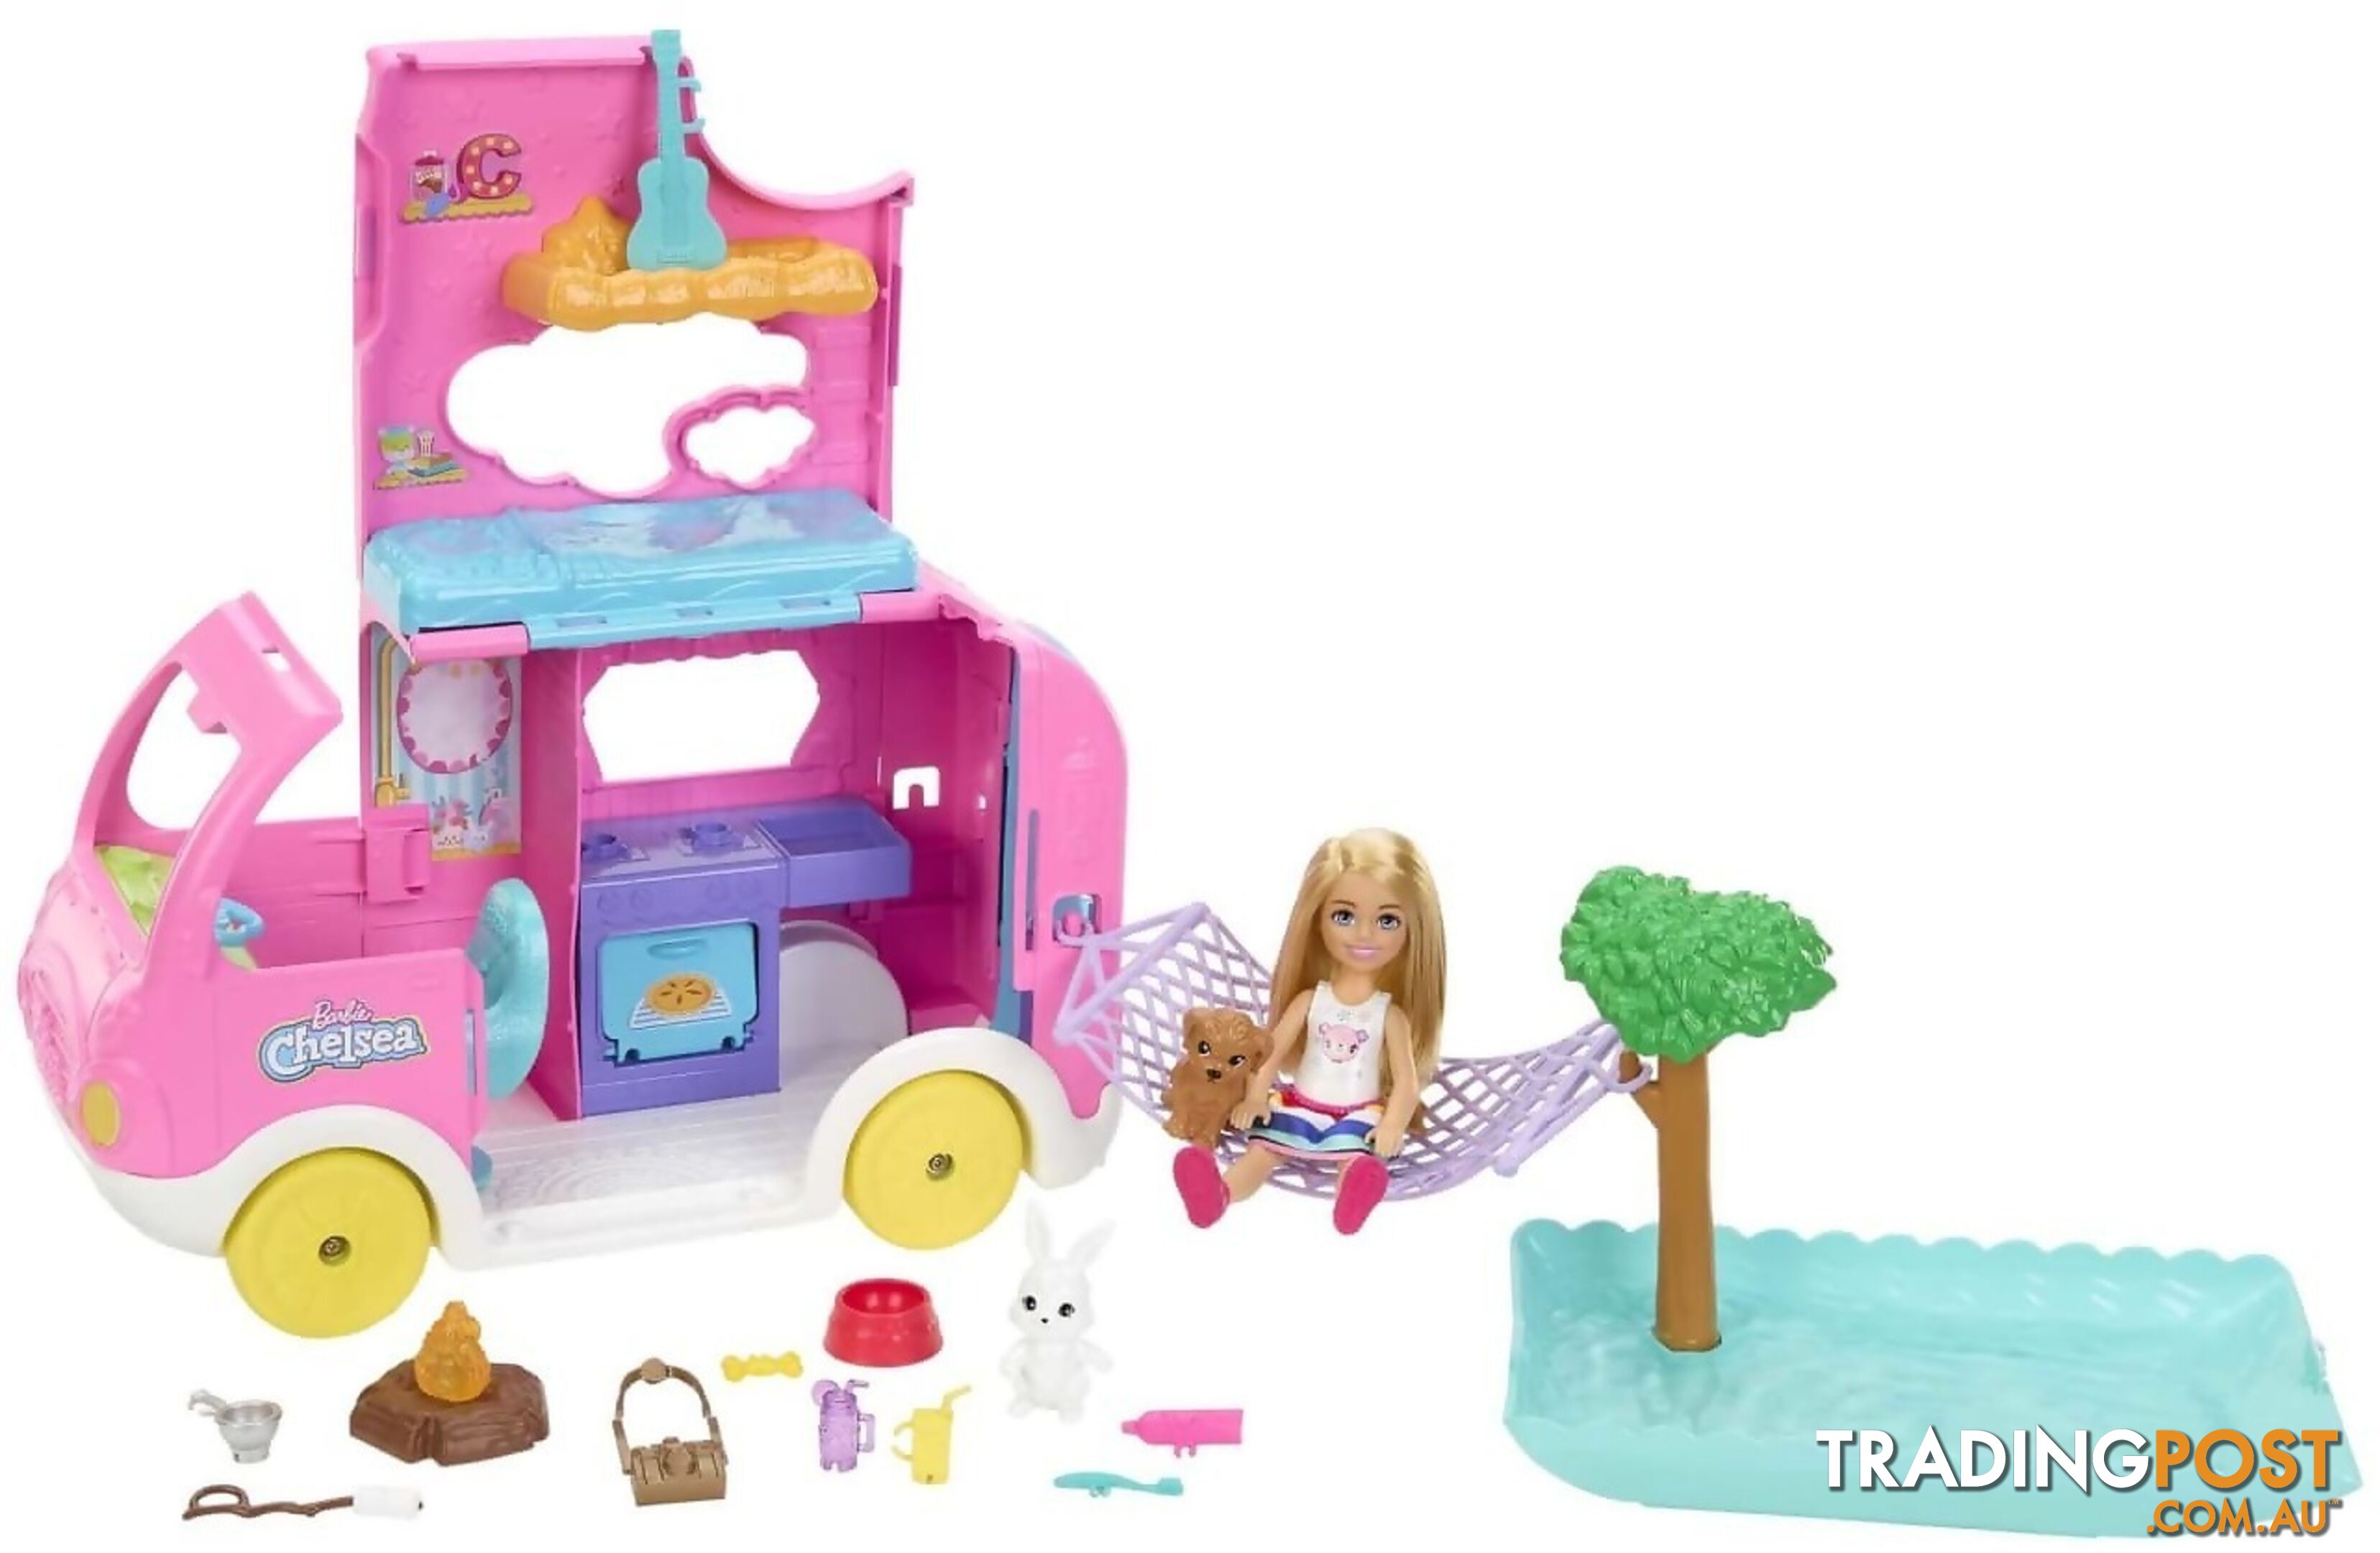 Barbie - Chelsea 2-in-1 Camper Playset With Chelsea Small Doll 2 Pets & 15 Accessories - Mattel - Mahnh90 - 194735141418